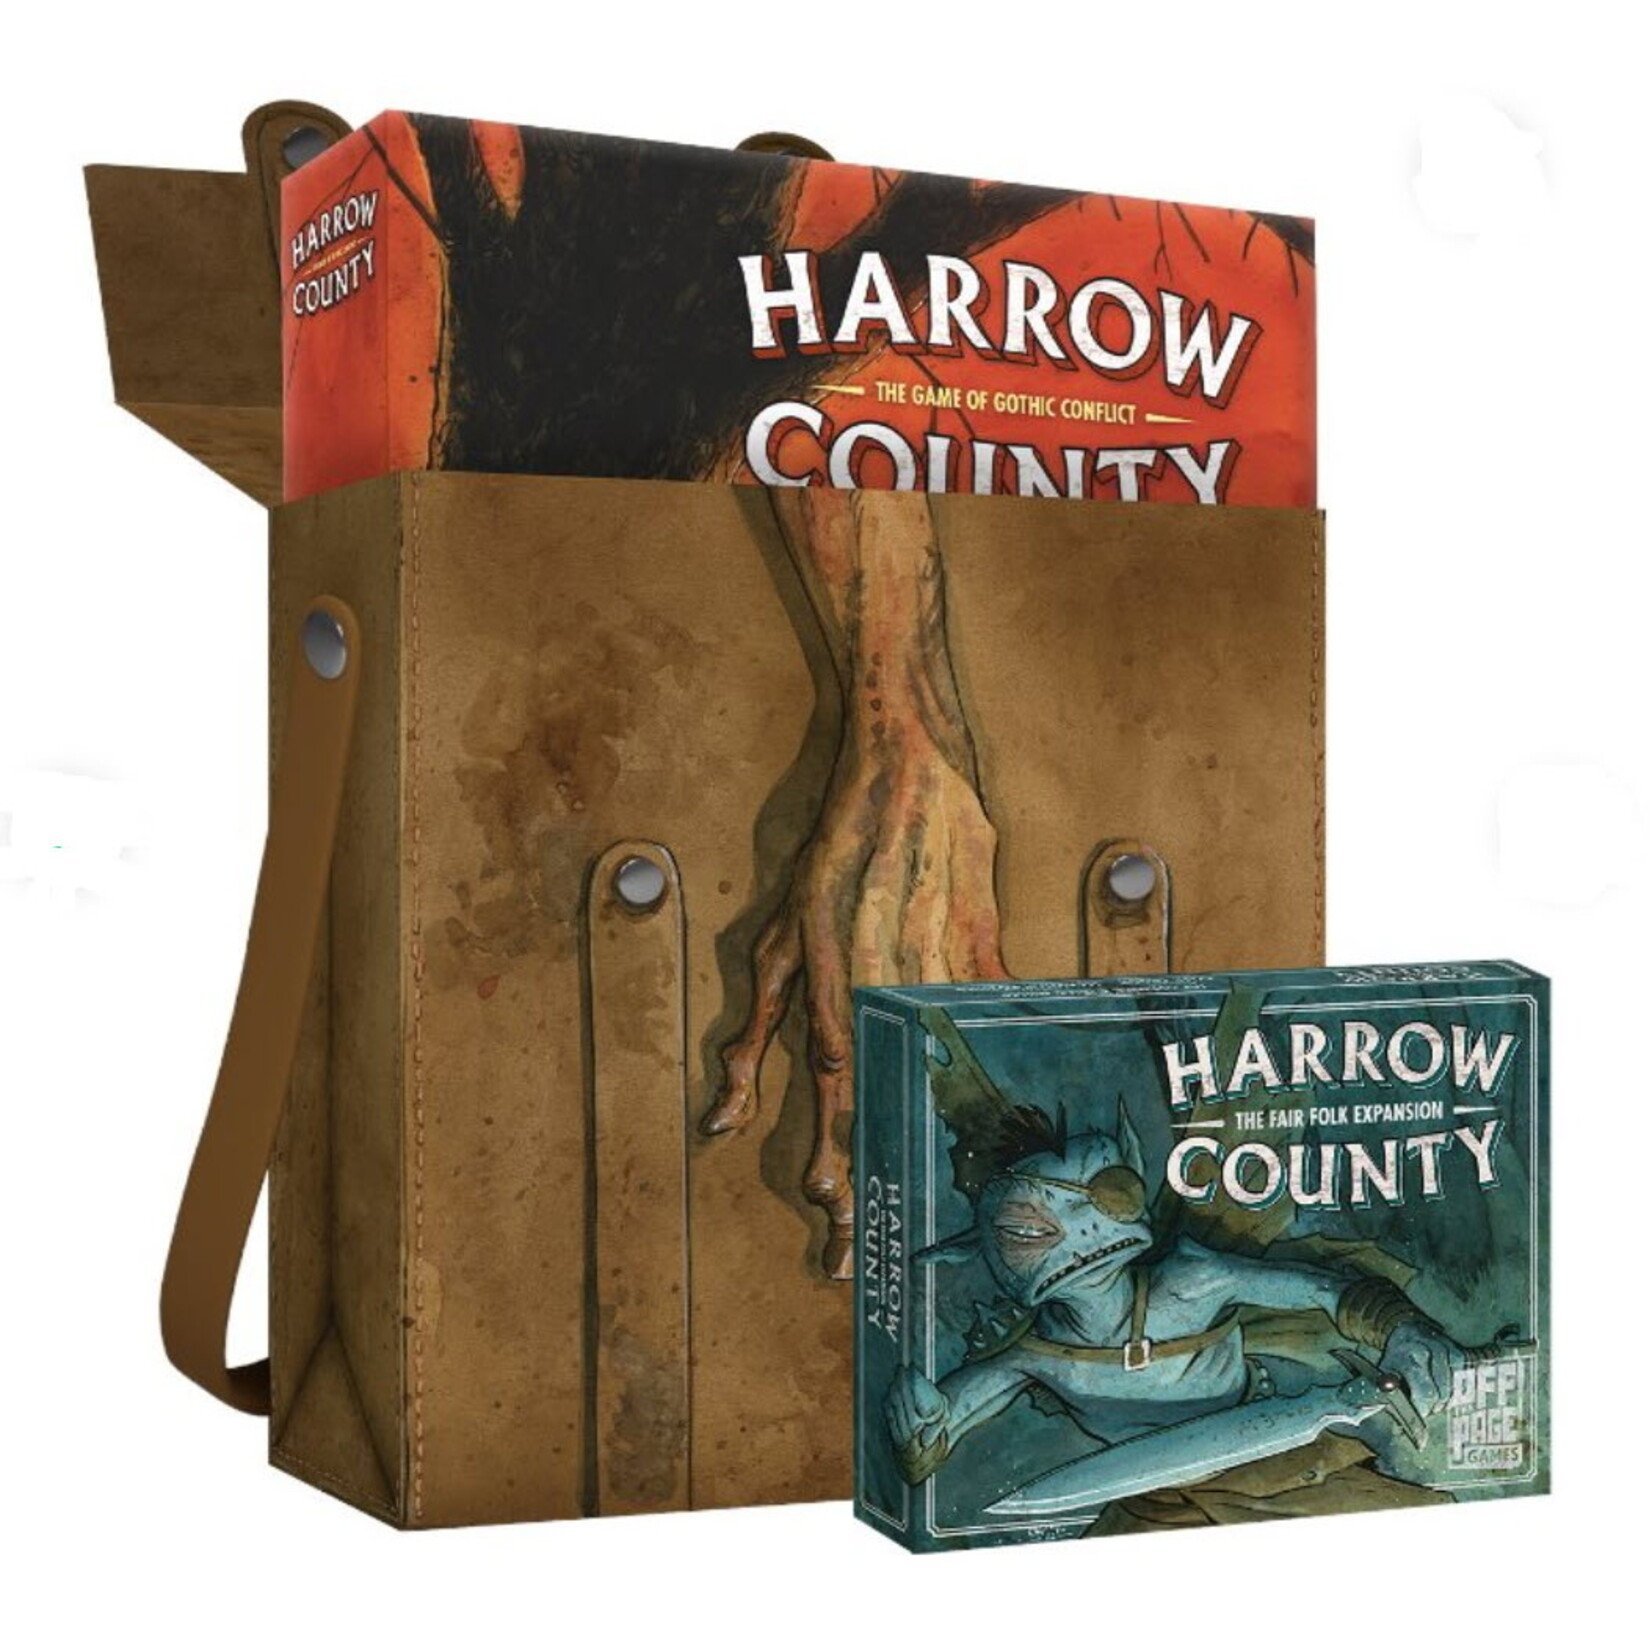 Off The Page Games Harrow County Satchel Edition